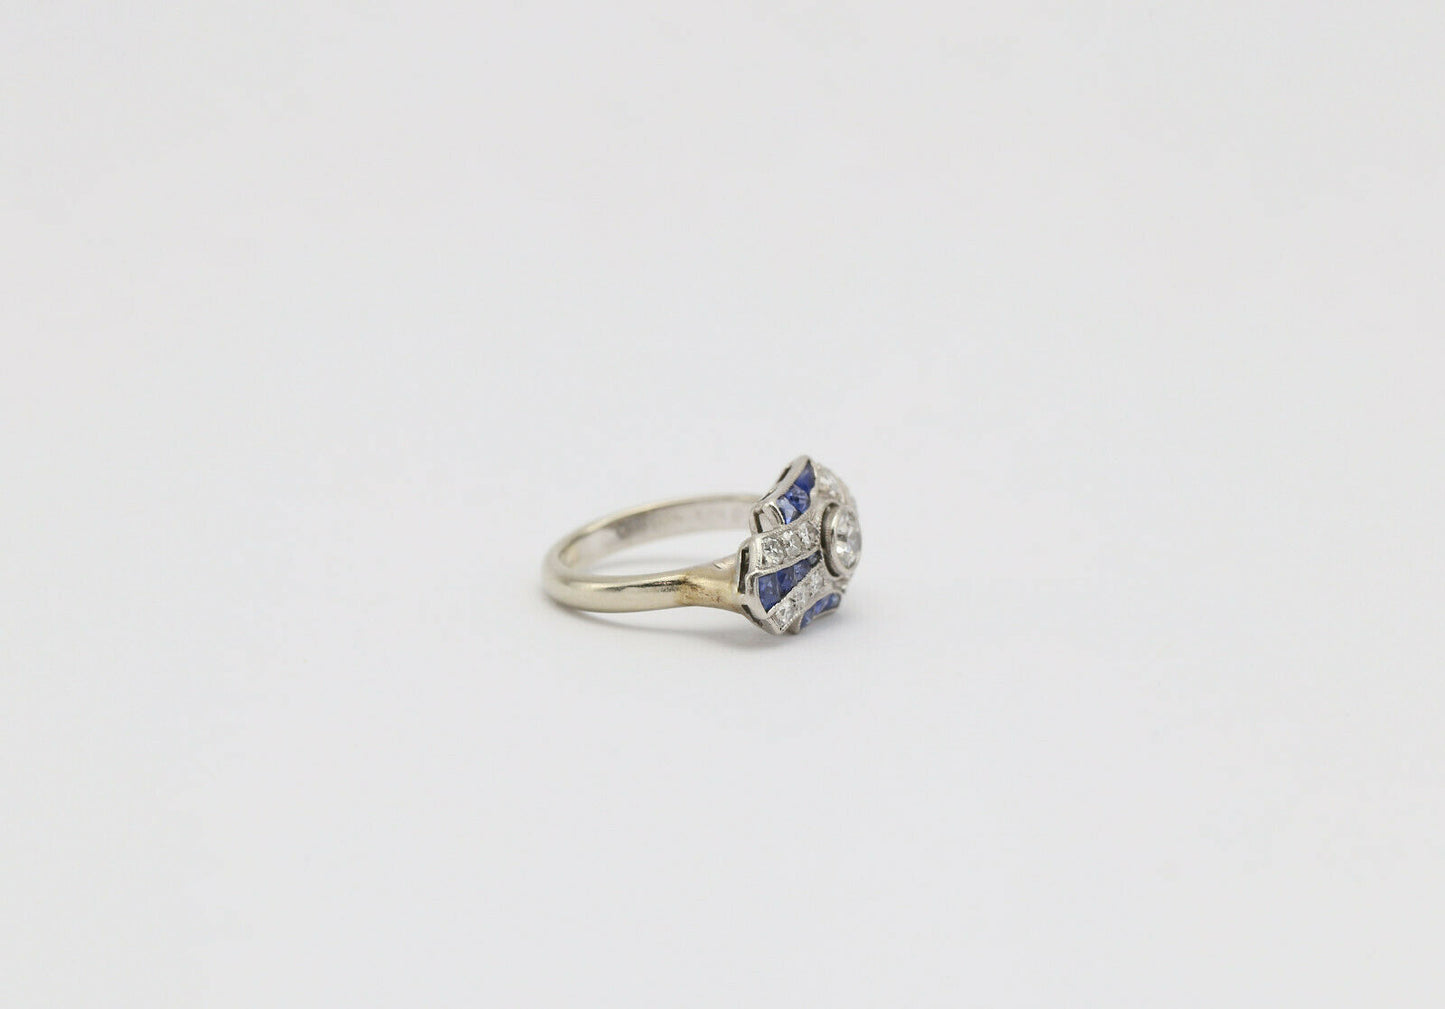 Victorian 14k White Gold Ladies Sapphire & Diamond Pinky Ring, Size 2.75 (up to size 8) - 3.2g